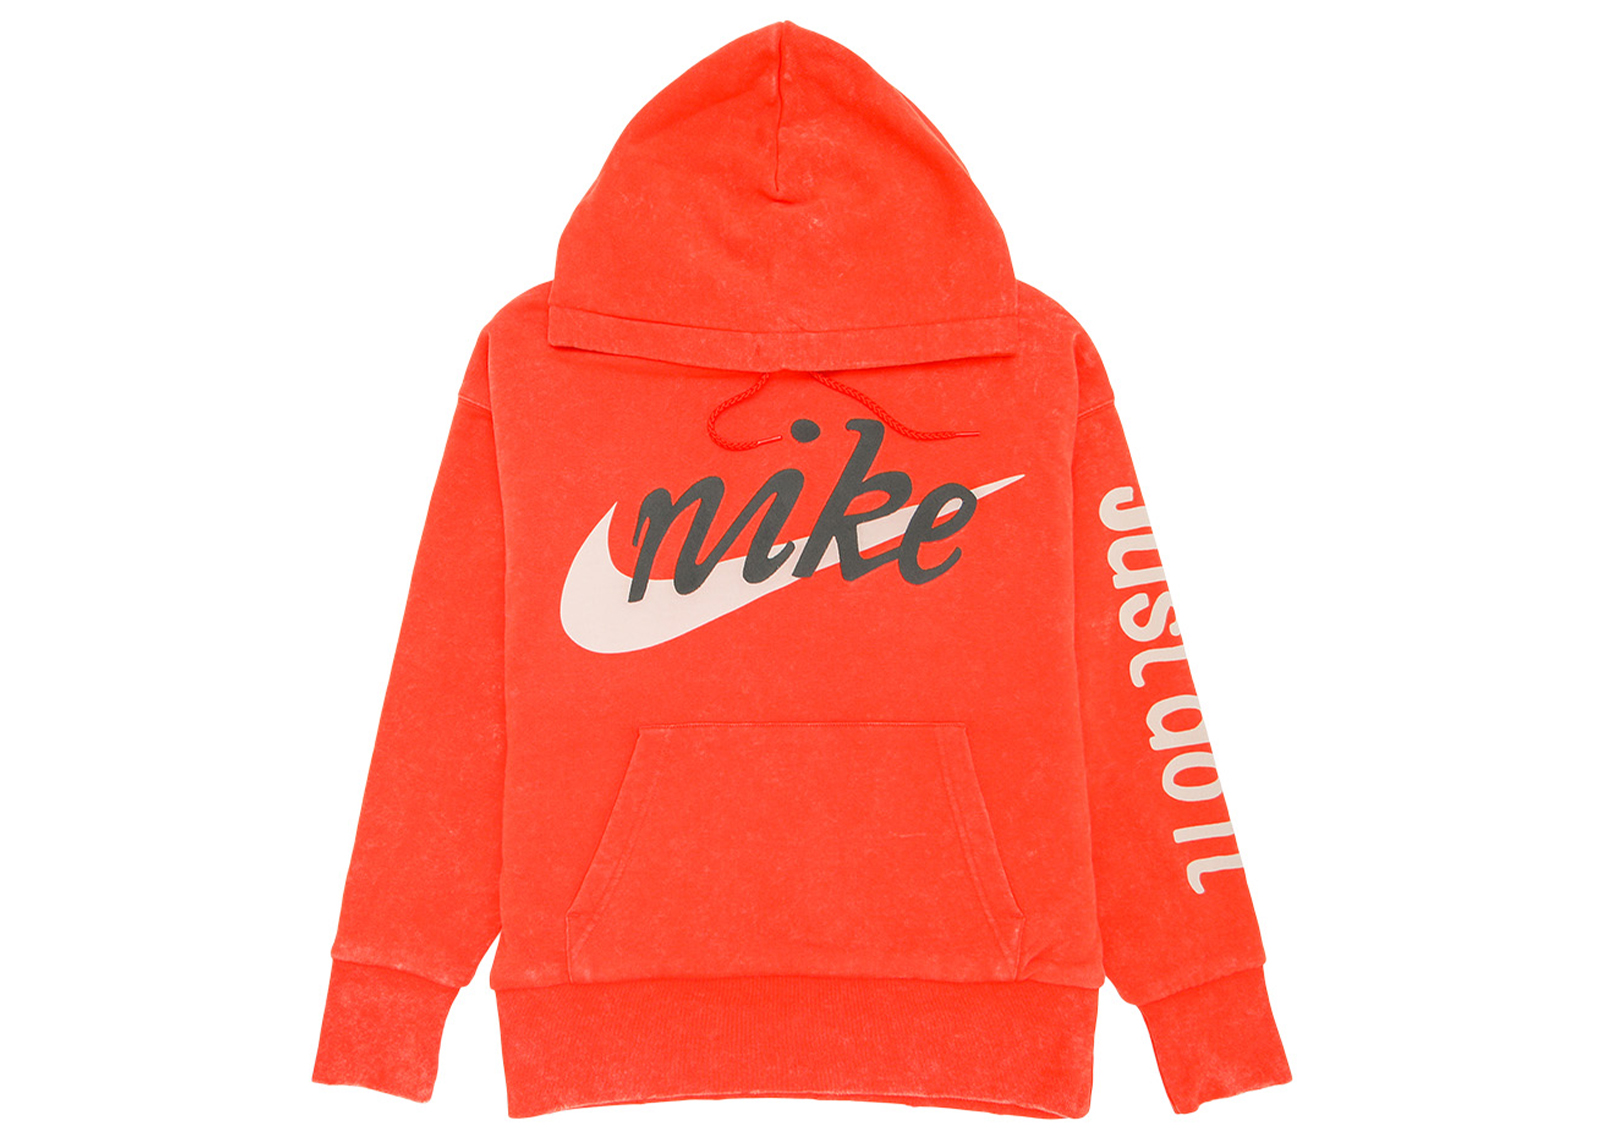 2XL cpfm nike shoebox hooded pullover